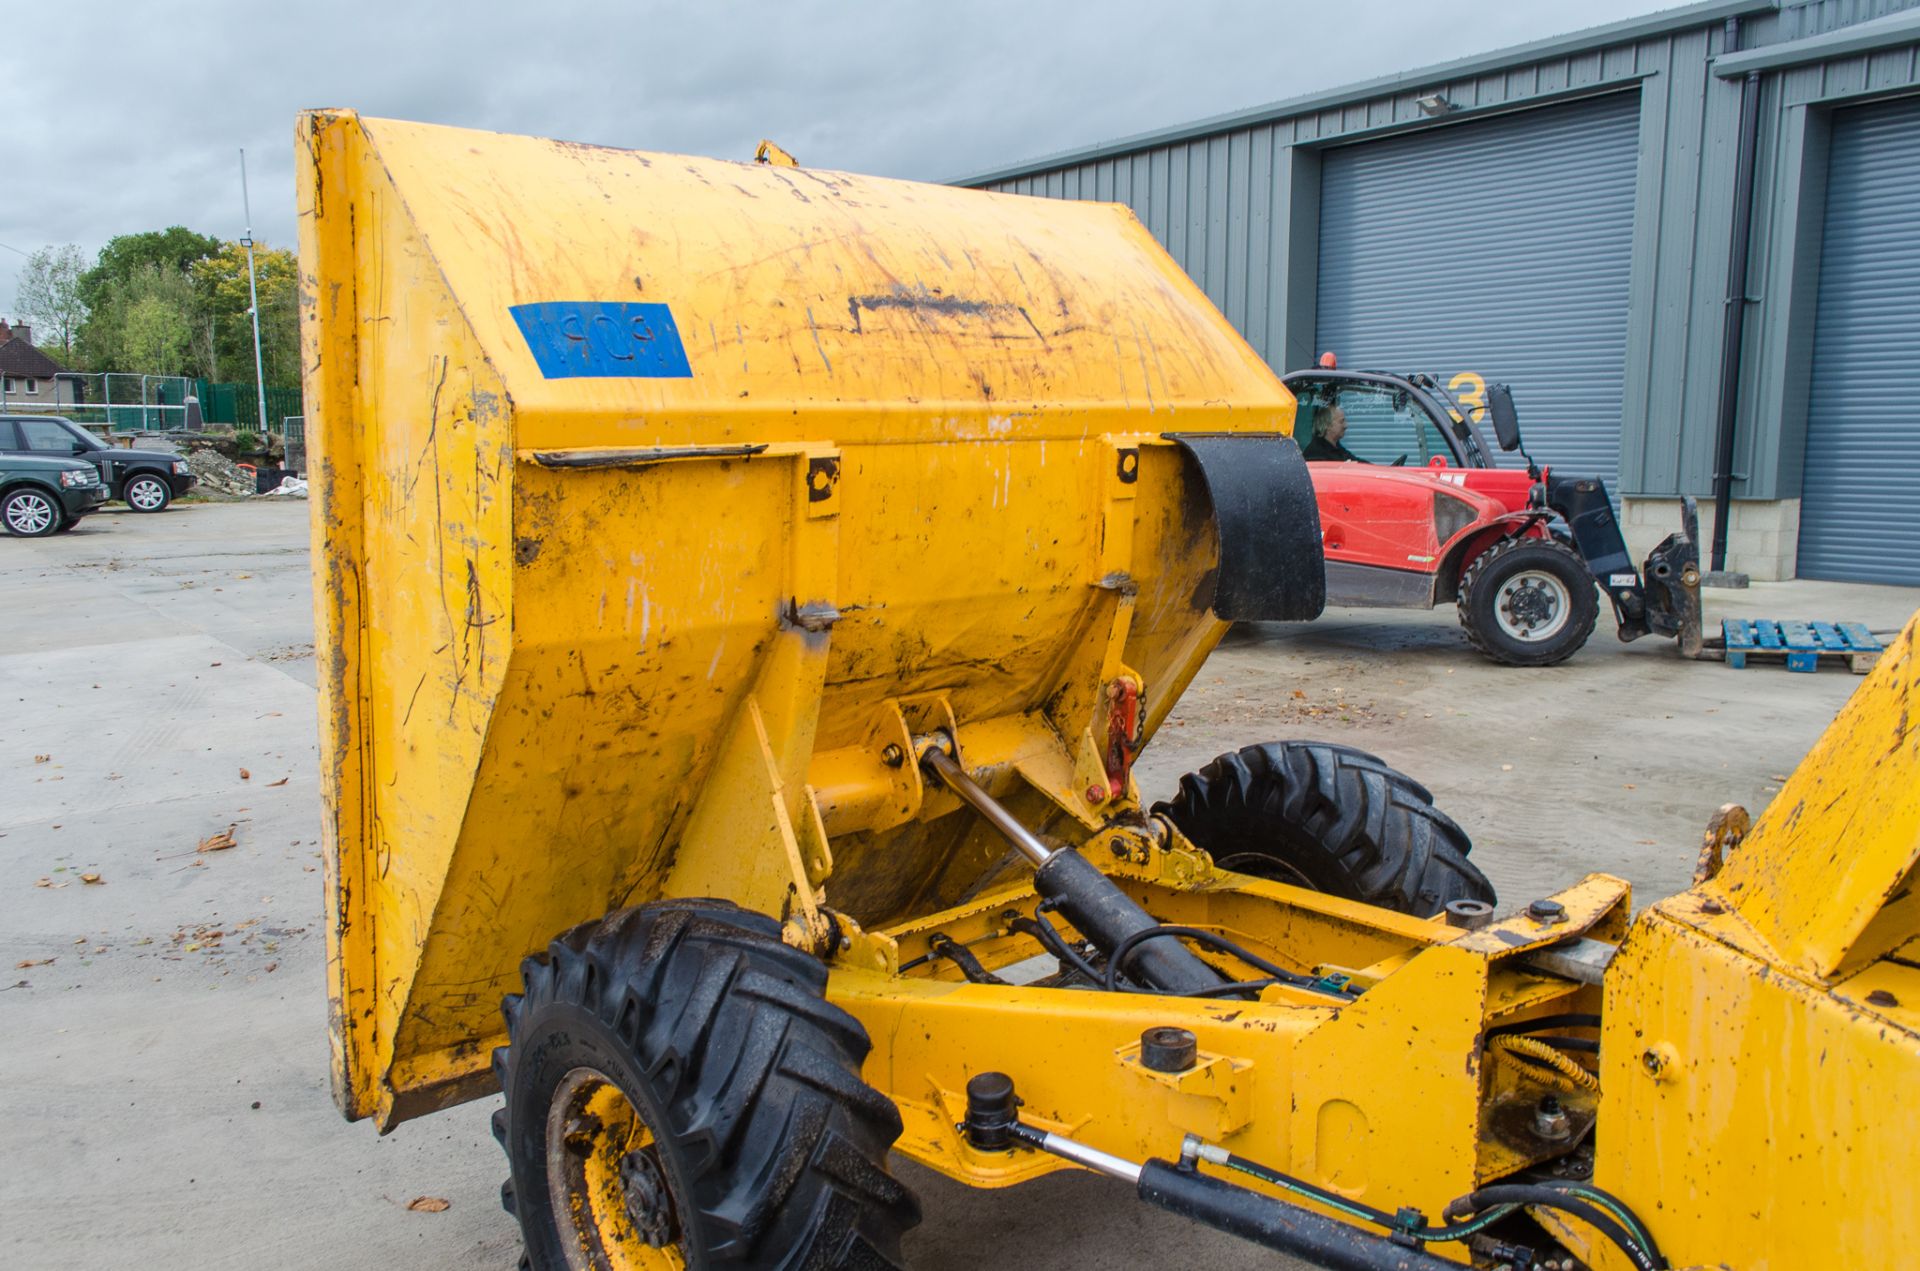 Thwaites 3 tonne straight skip dumper Year: 2005 S/N: 503A7099 Recorded Hours: 3160 1909 - Image 10 of 20